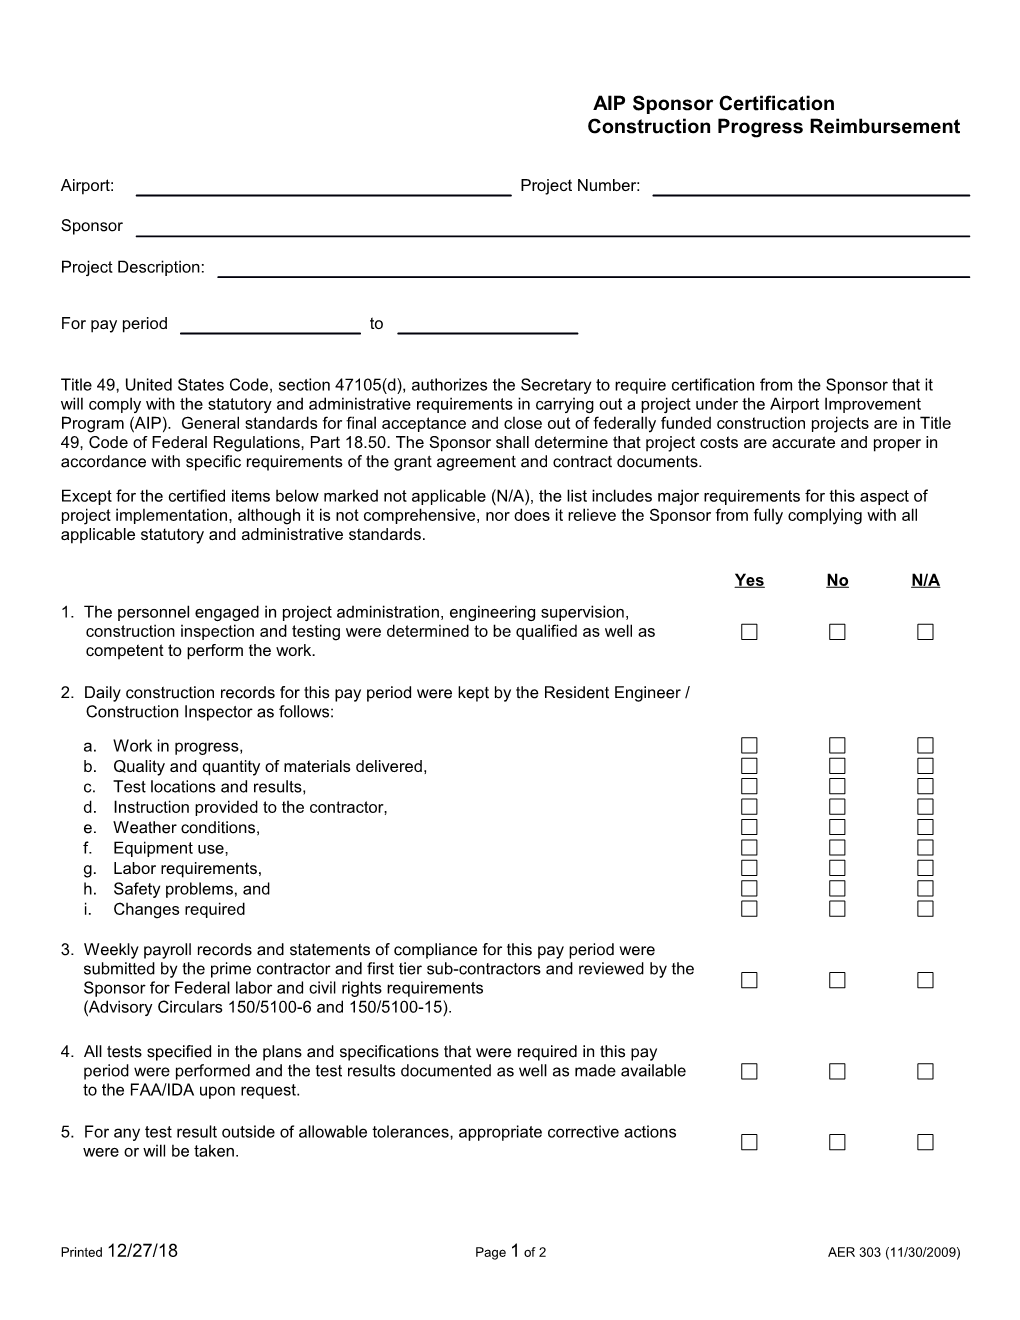 *This Form Was Adapted by the Illinois Department of Transportation S Division of Aeronautics